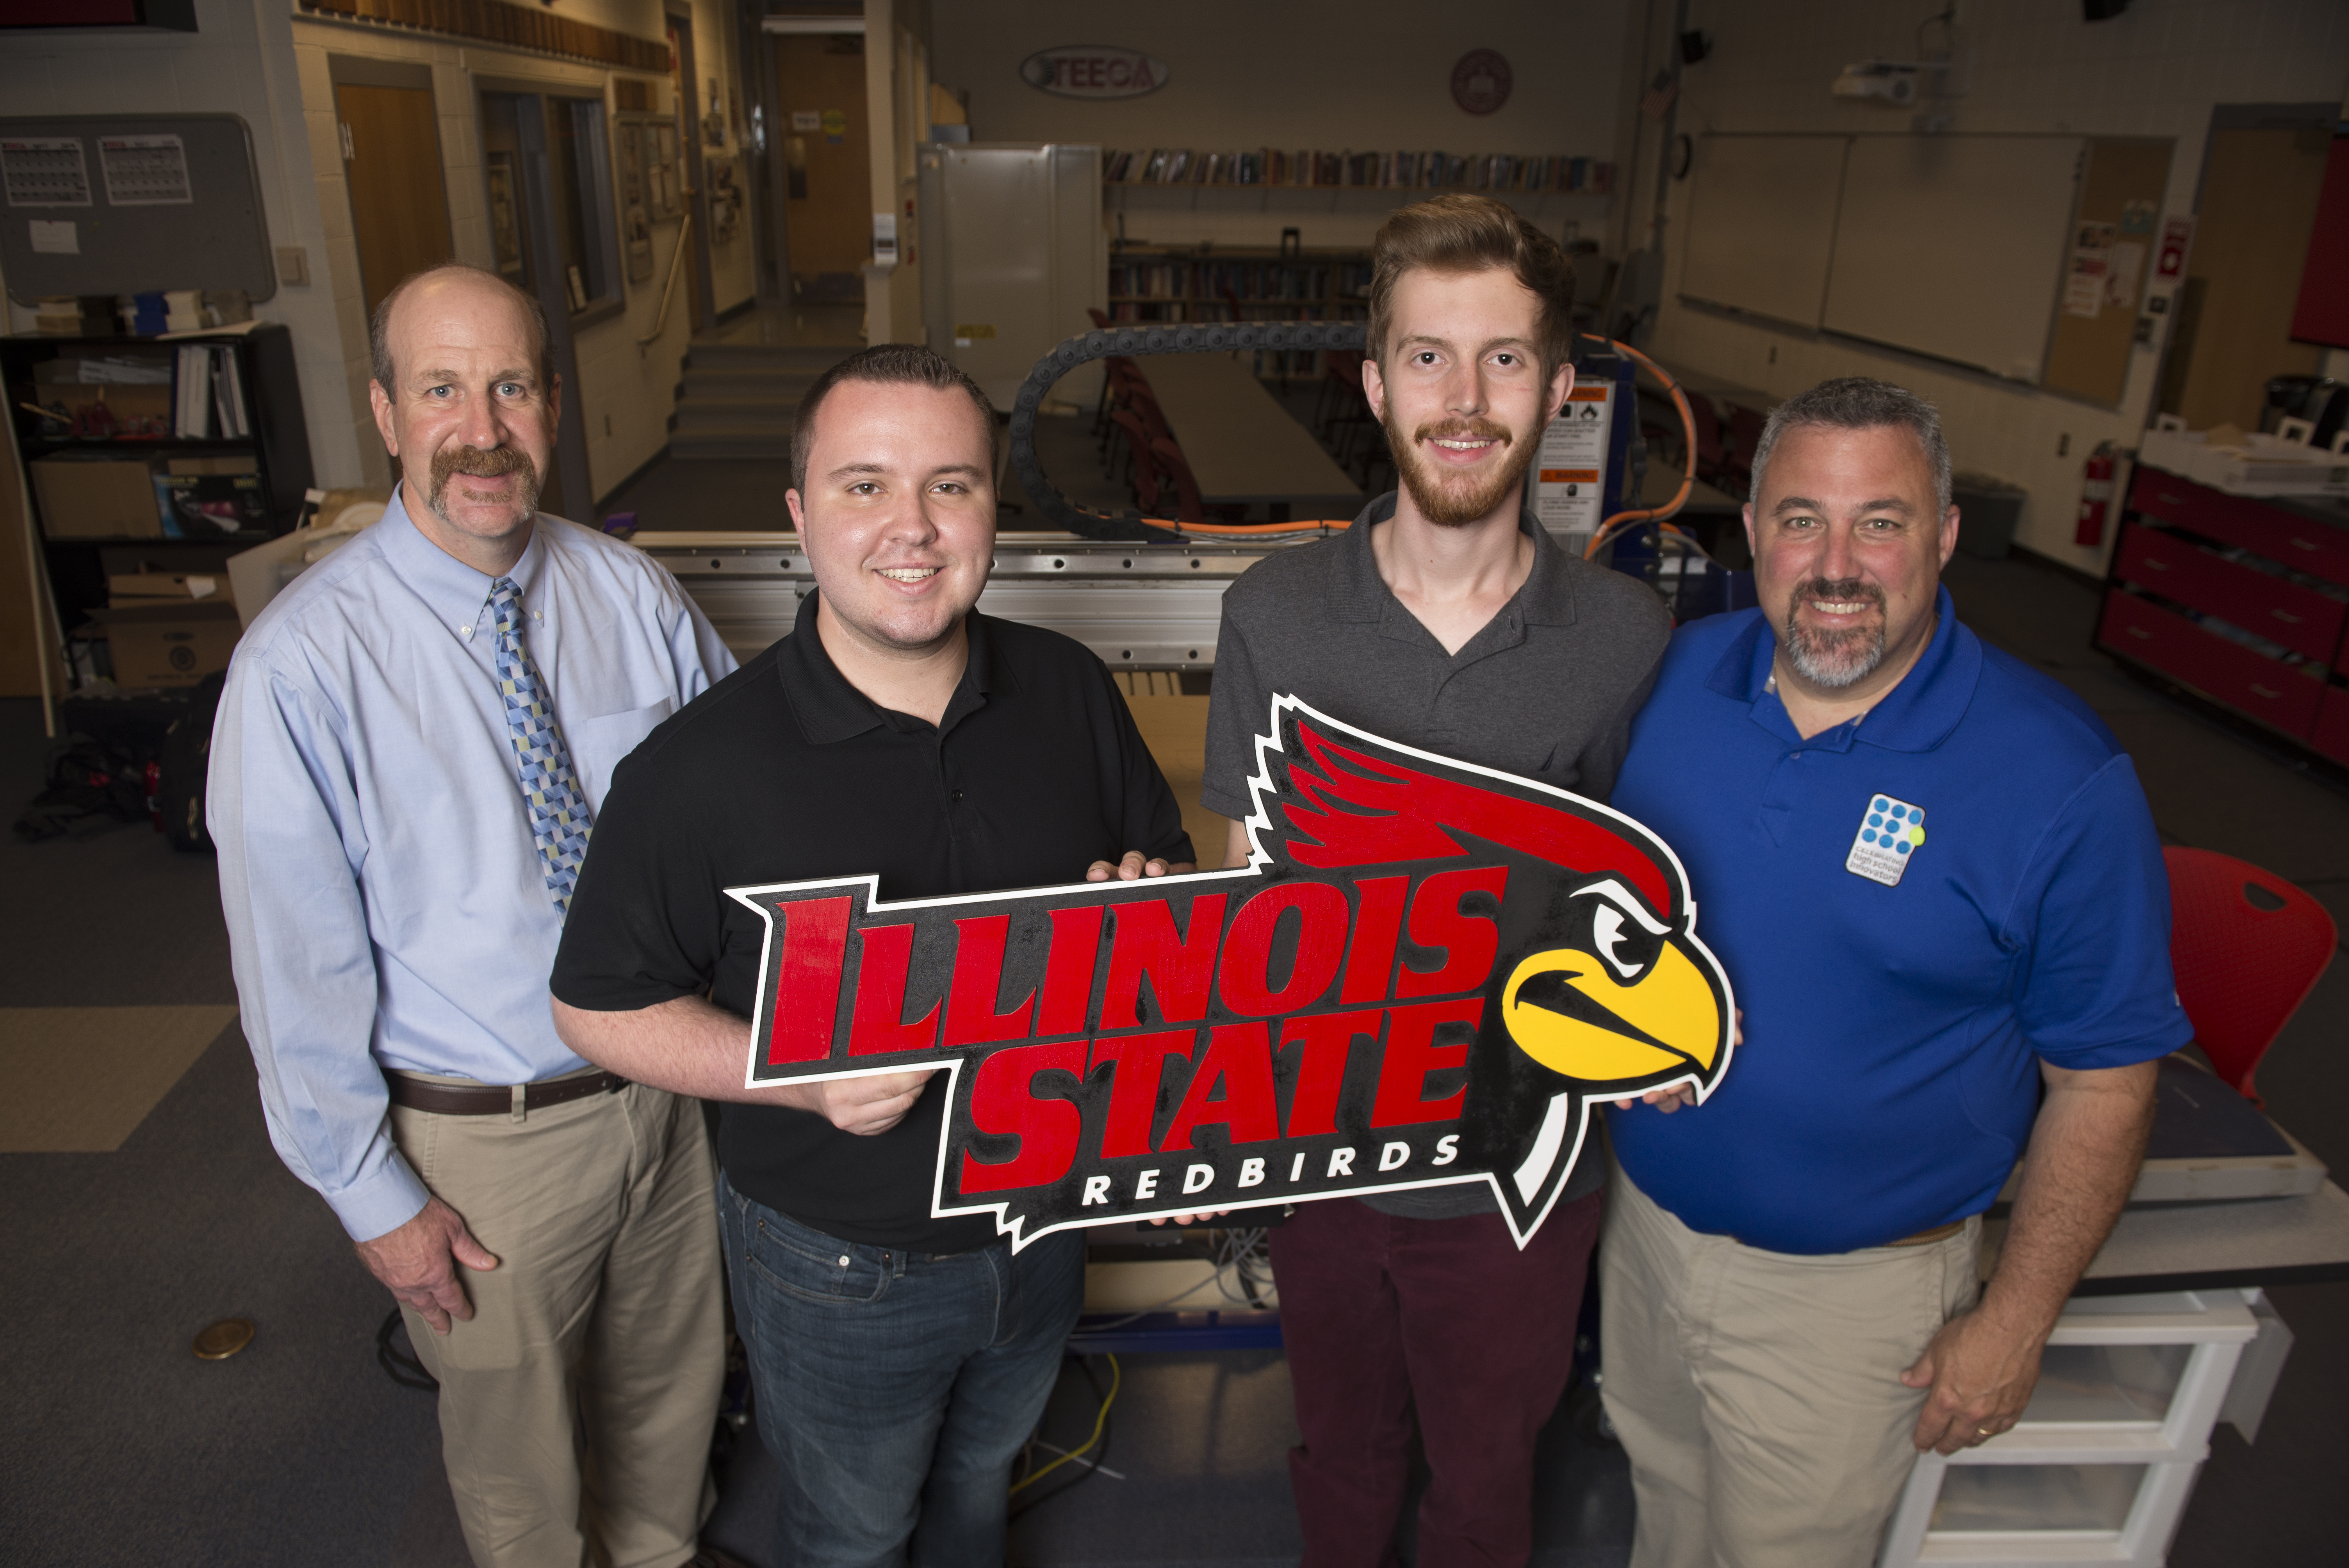 Illinois State has been an important part of CHSI from the beginning of the program: Here are a few current CHSI leaders: Illinois State Professor Chris Merrill (left), Illinois State students Blake Whittle and Thomas Moore, and CHSI Director Paul Ritter